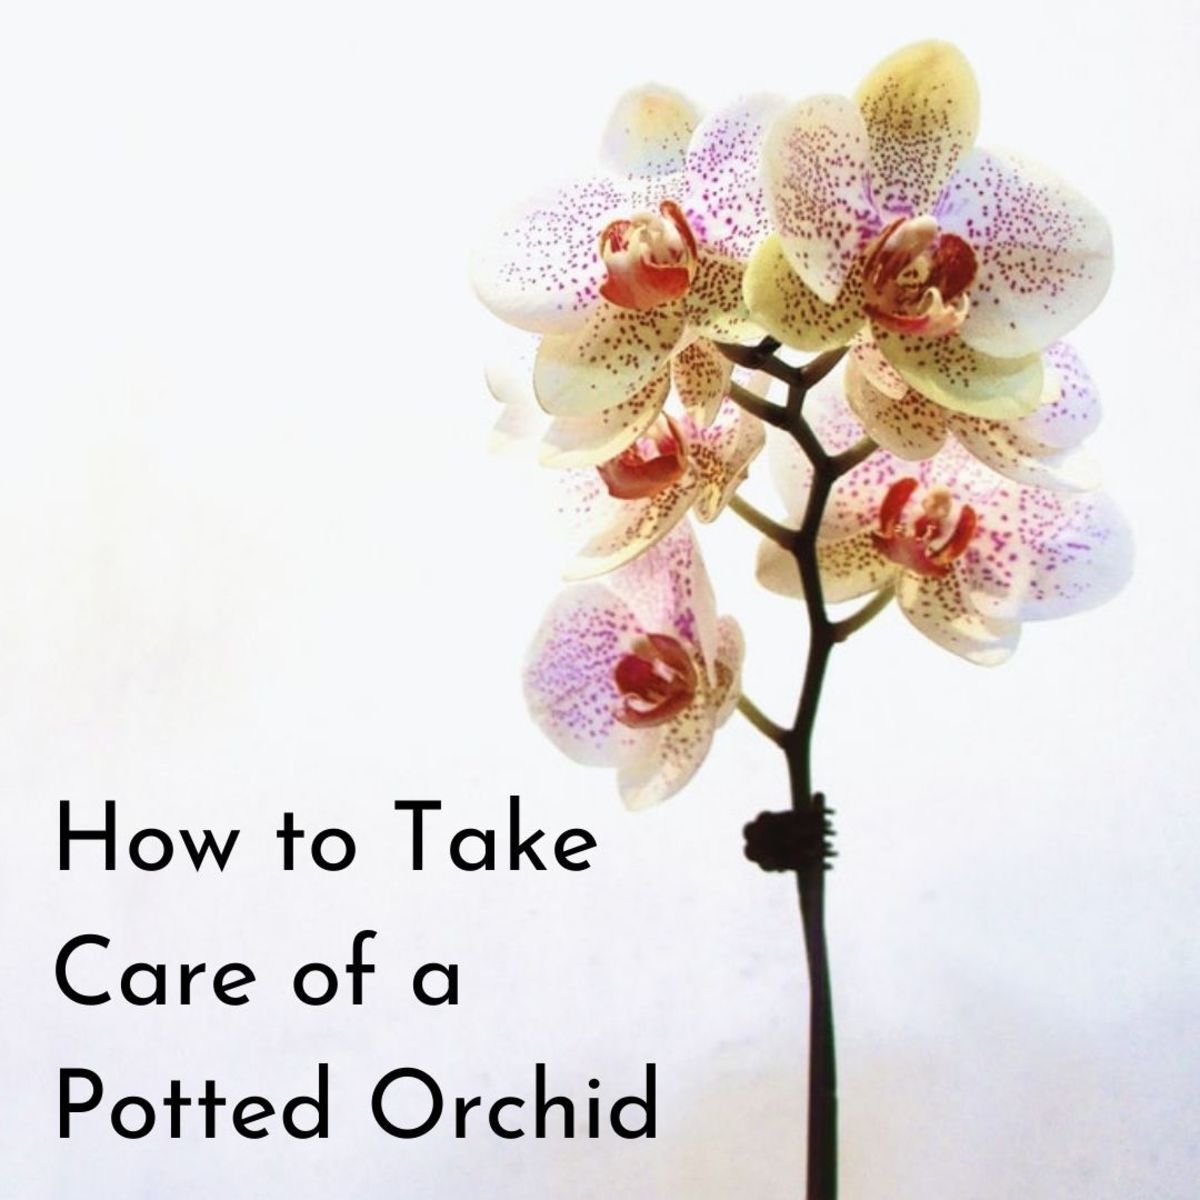 Potted orchid care